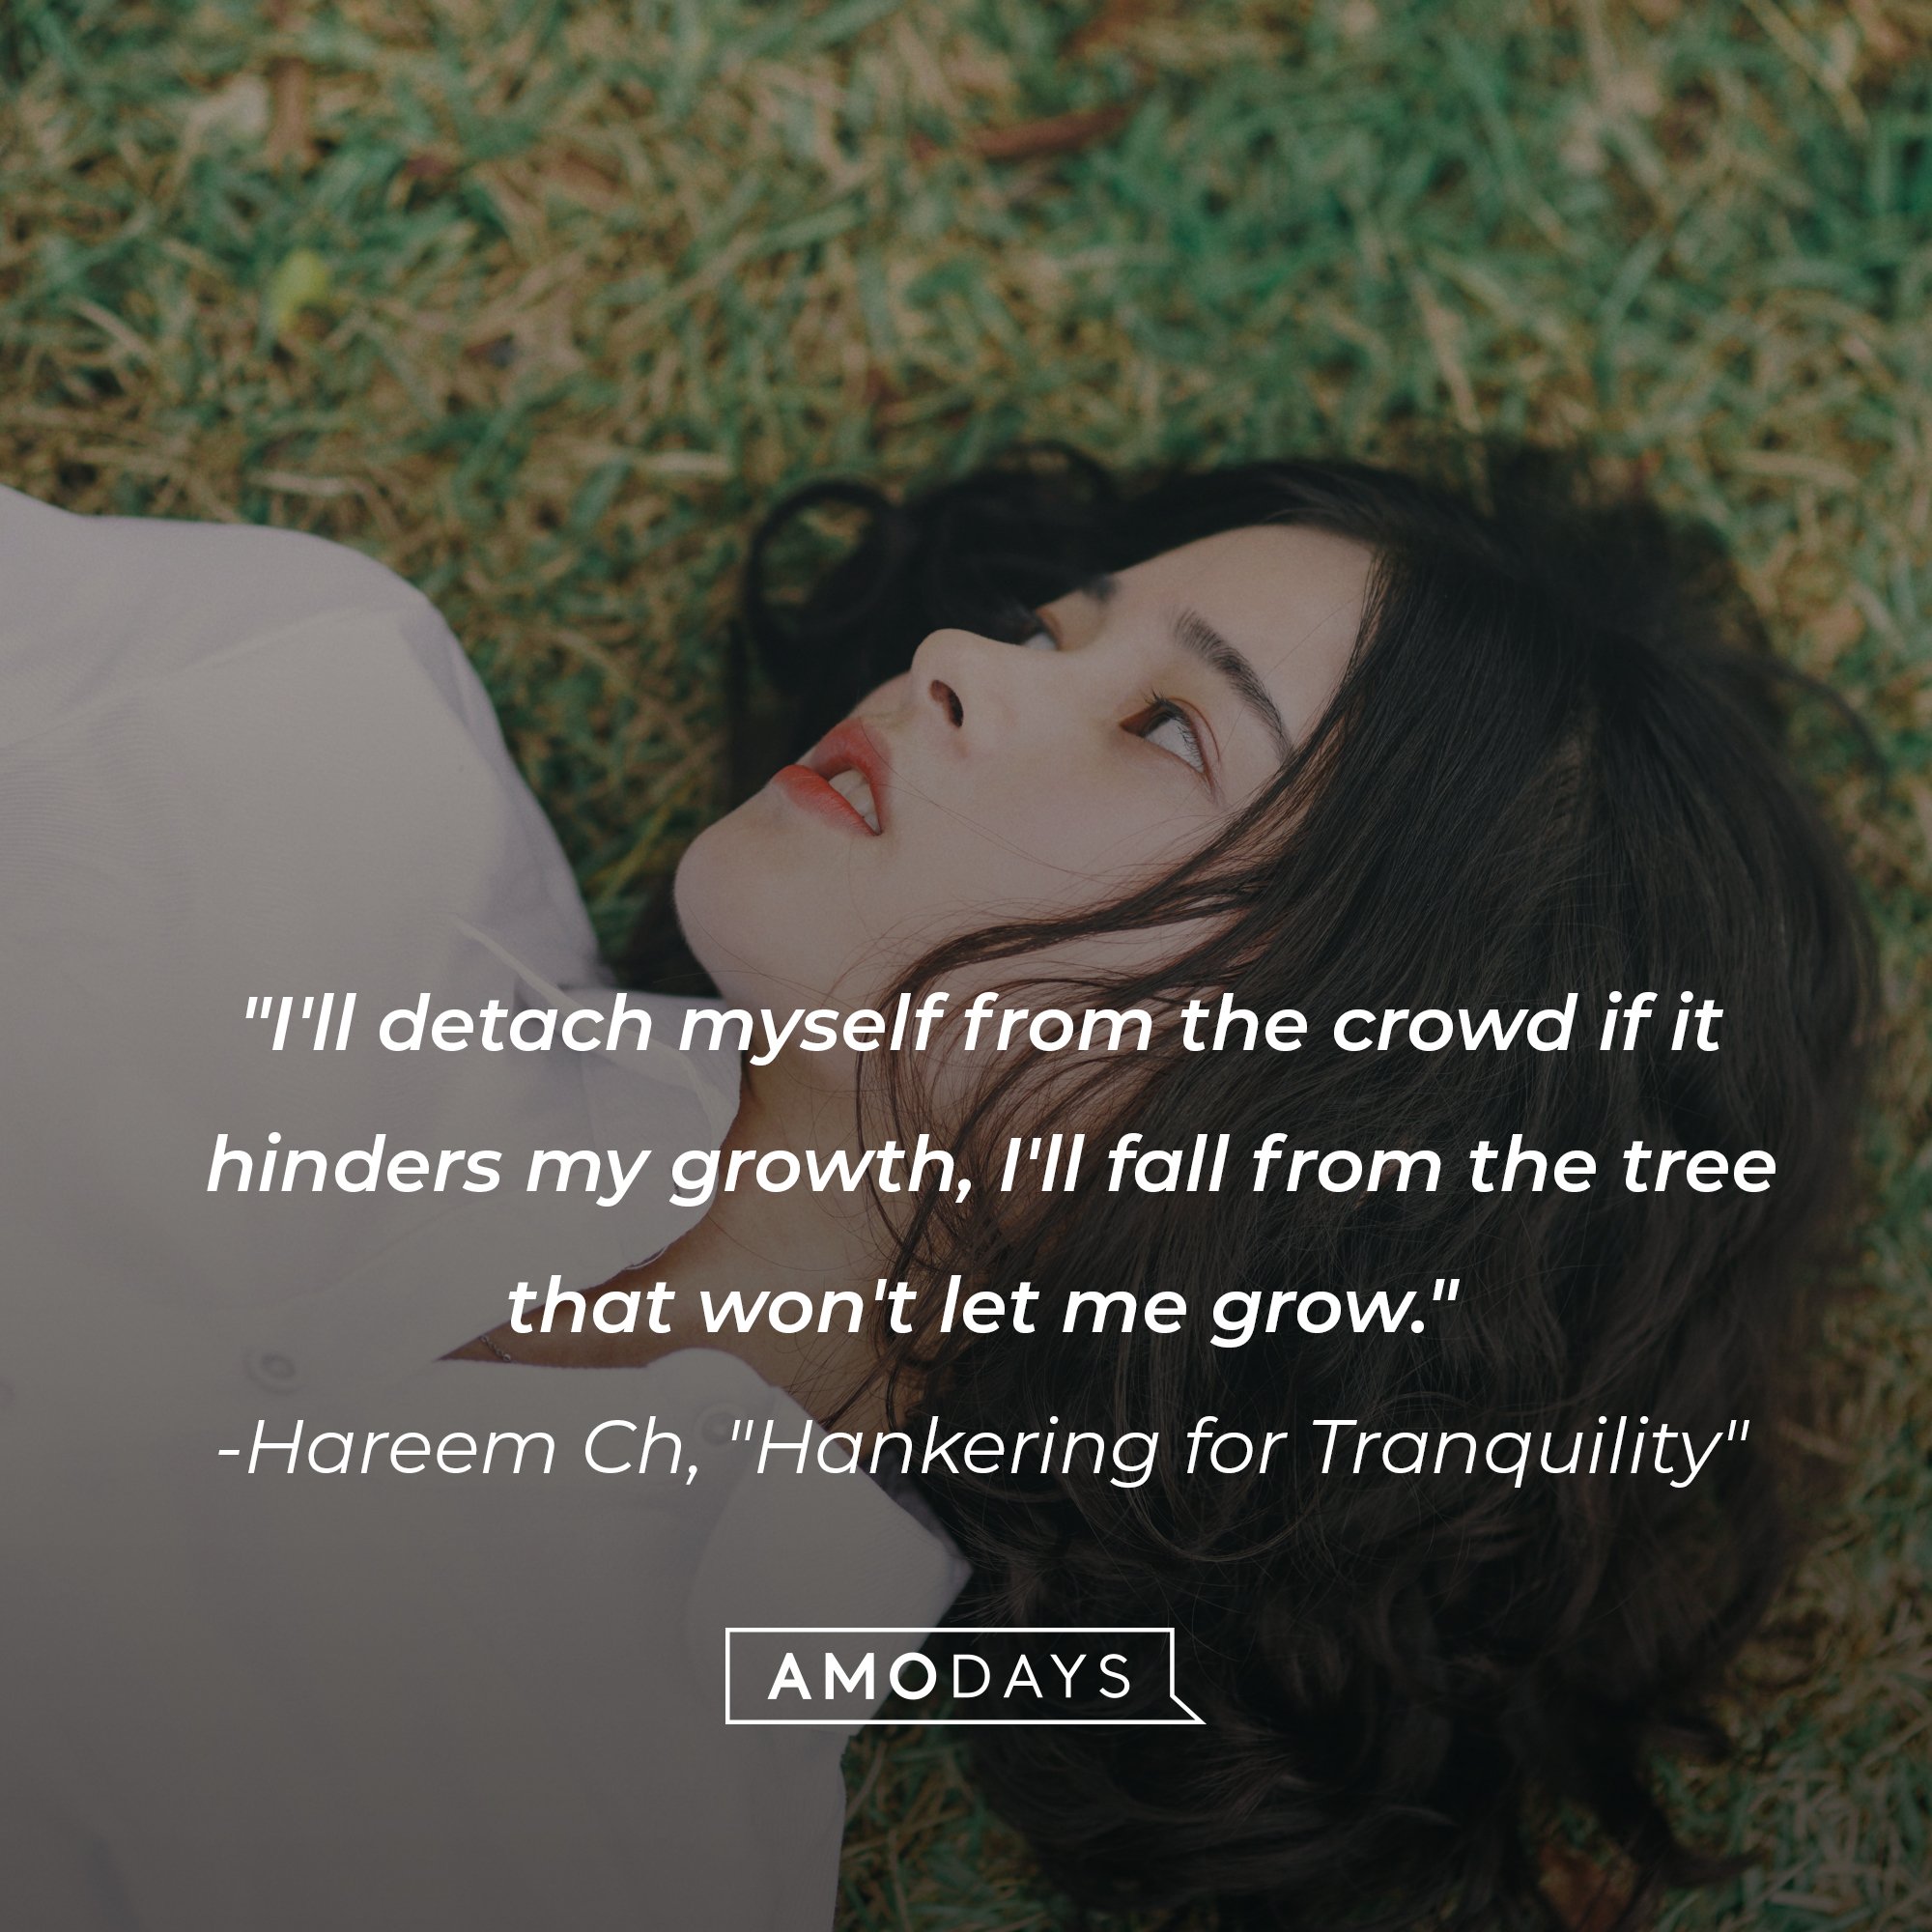 Hareem Ch's "Hankering for Tranquility" quote: "I'll detach myself from the crowd if it hinders my growth, I'll fall from the tree that won't let me grow." | Image: AmoDays